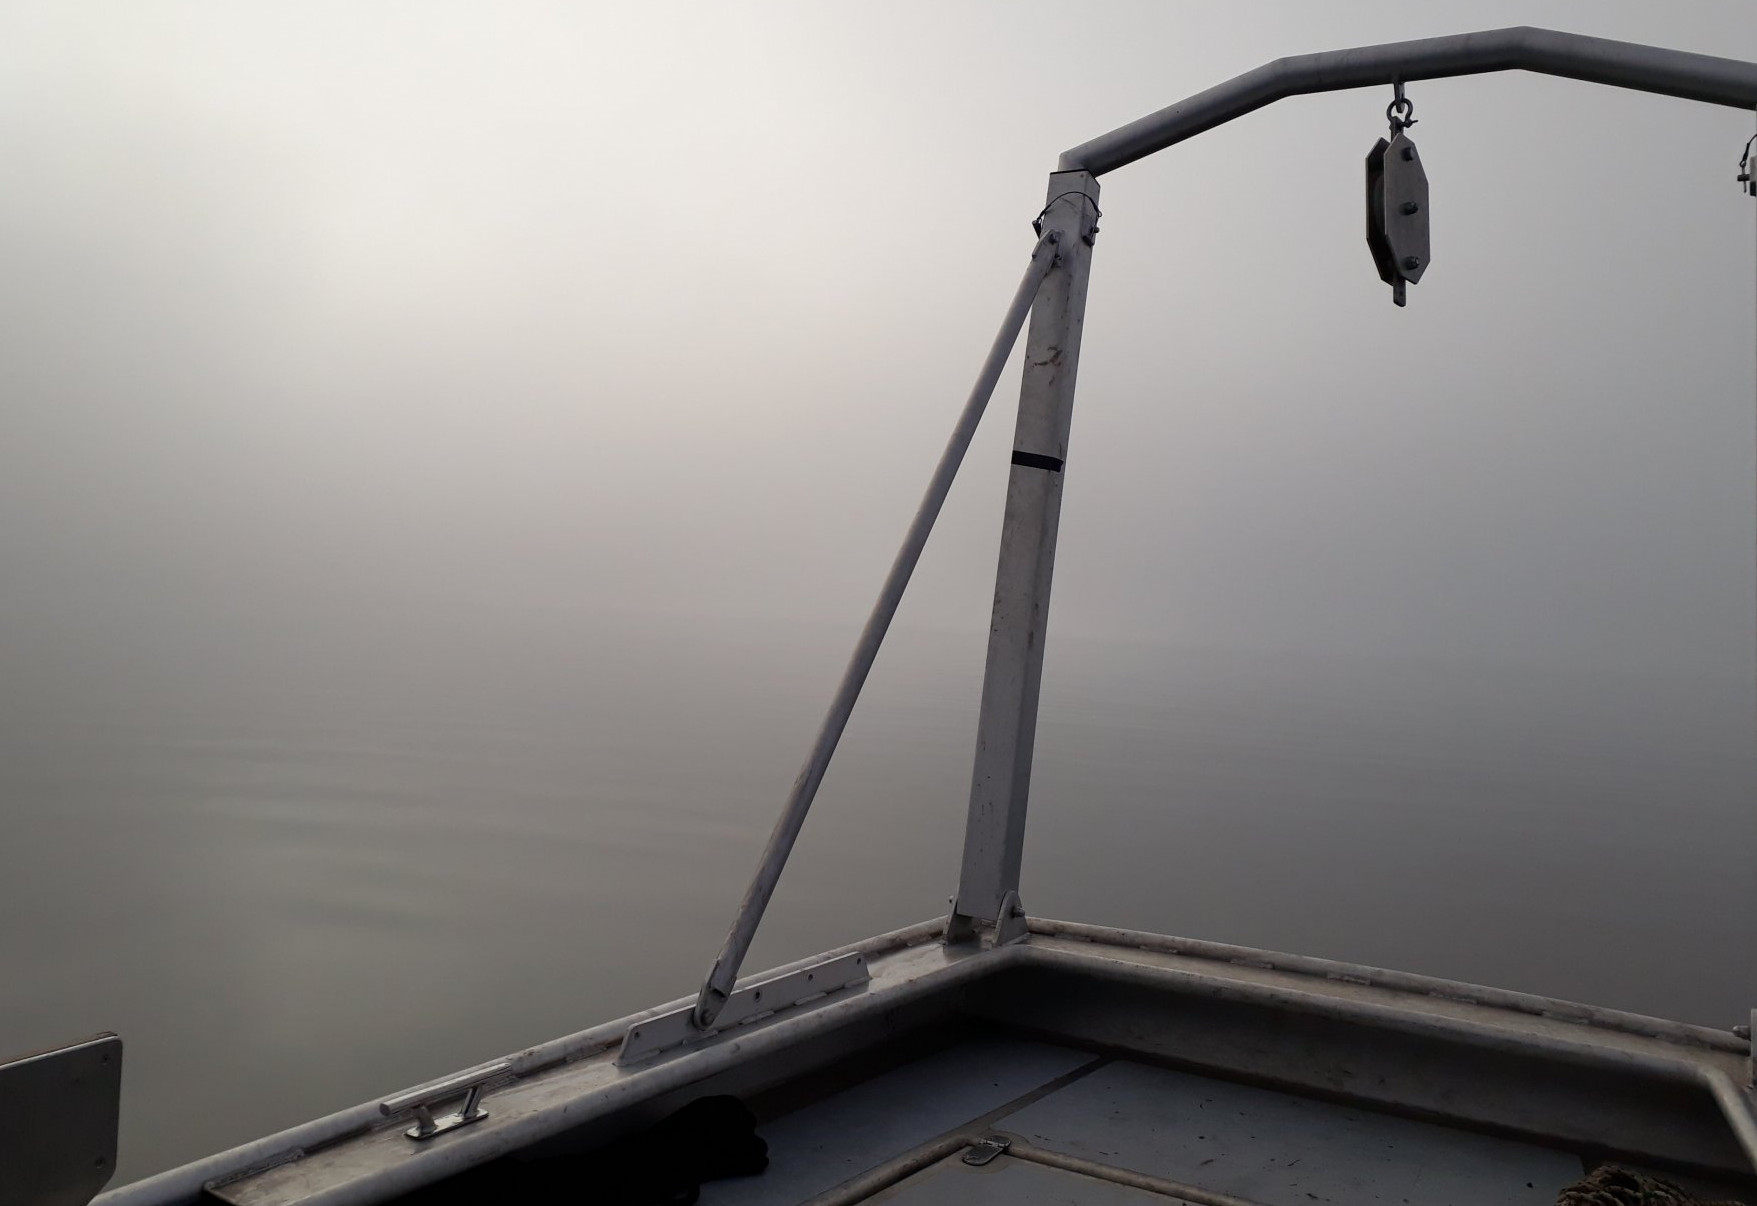 The excursions do not always take place in sunshine - like this foggy trip in February.  (©Max Planck Institute for Marine Microbiology, J. Graf)